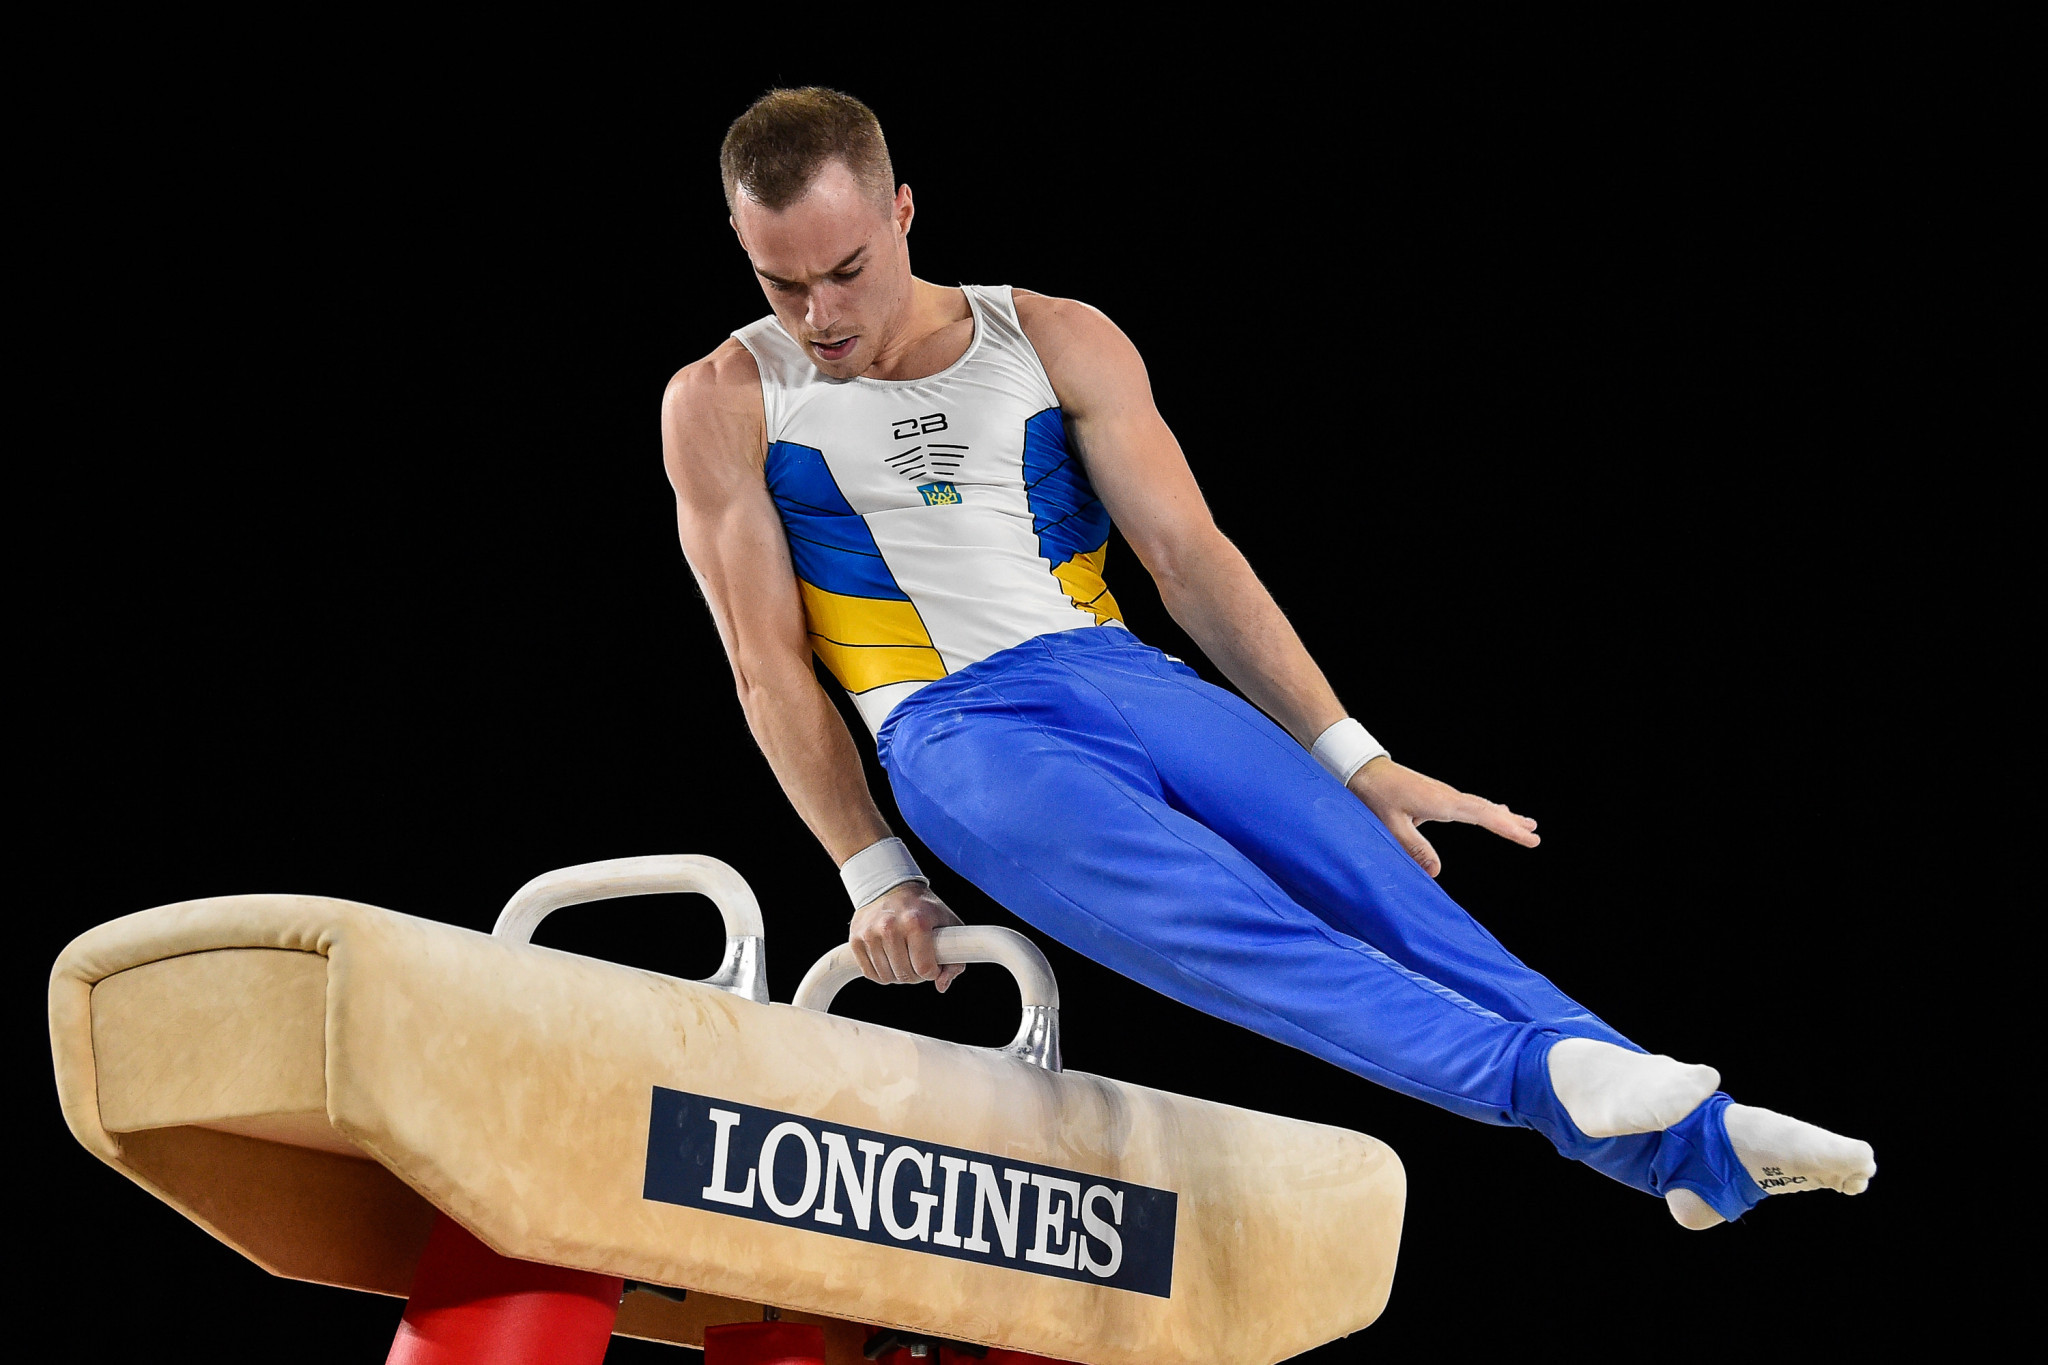 Olympic champions headline season-ending opening FIG Individual Apparatus World Cup in Cottbus